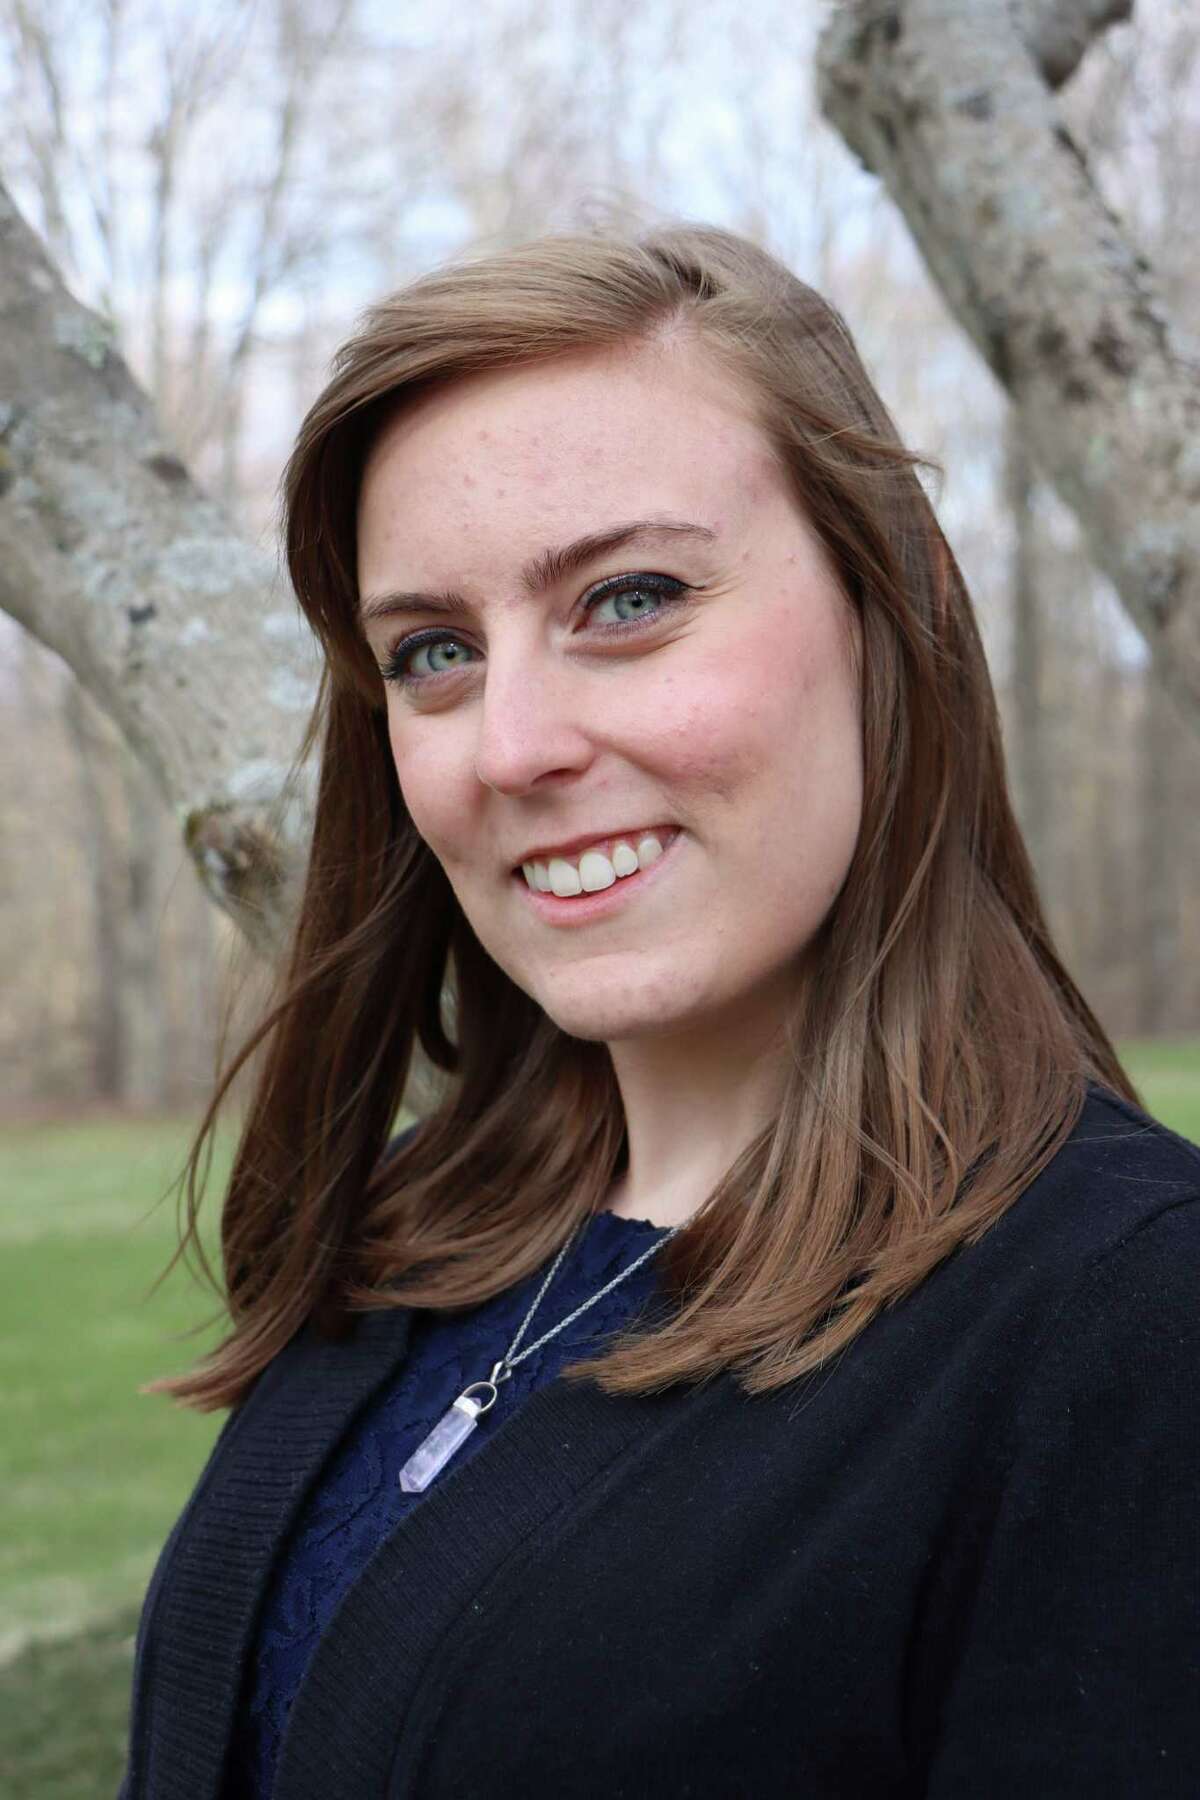 Lydia Curtiss of Litchfield is a student majoring in communication at Central Connecticut State University.